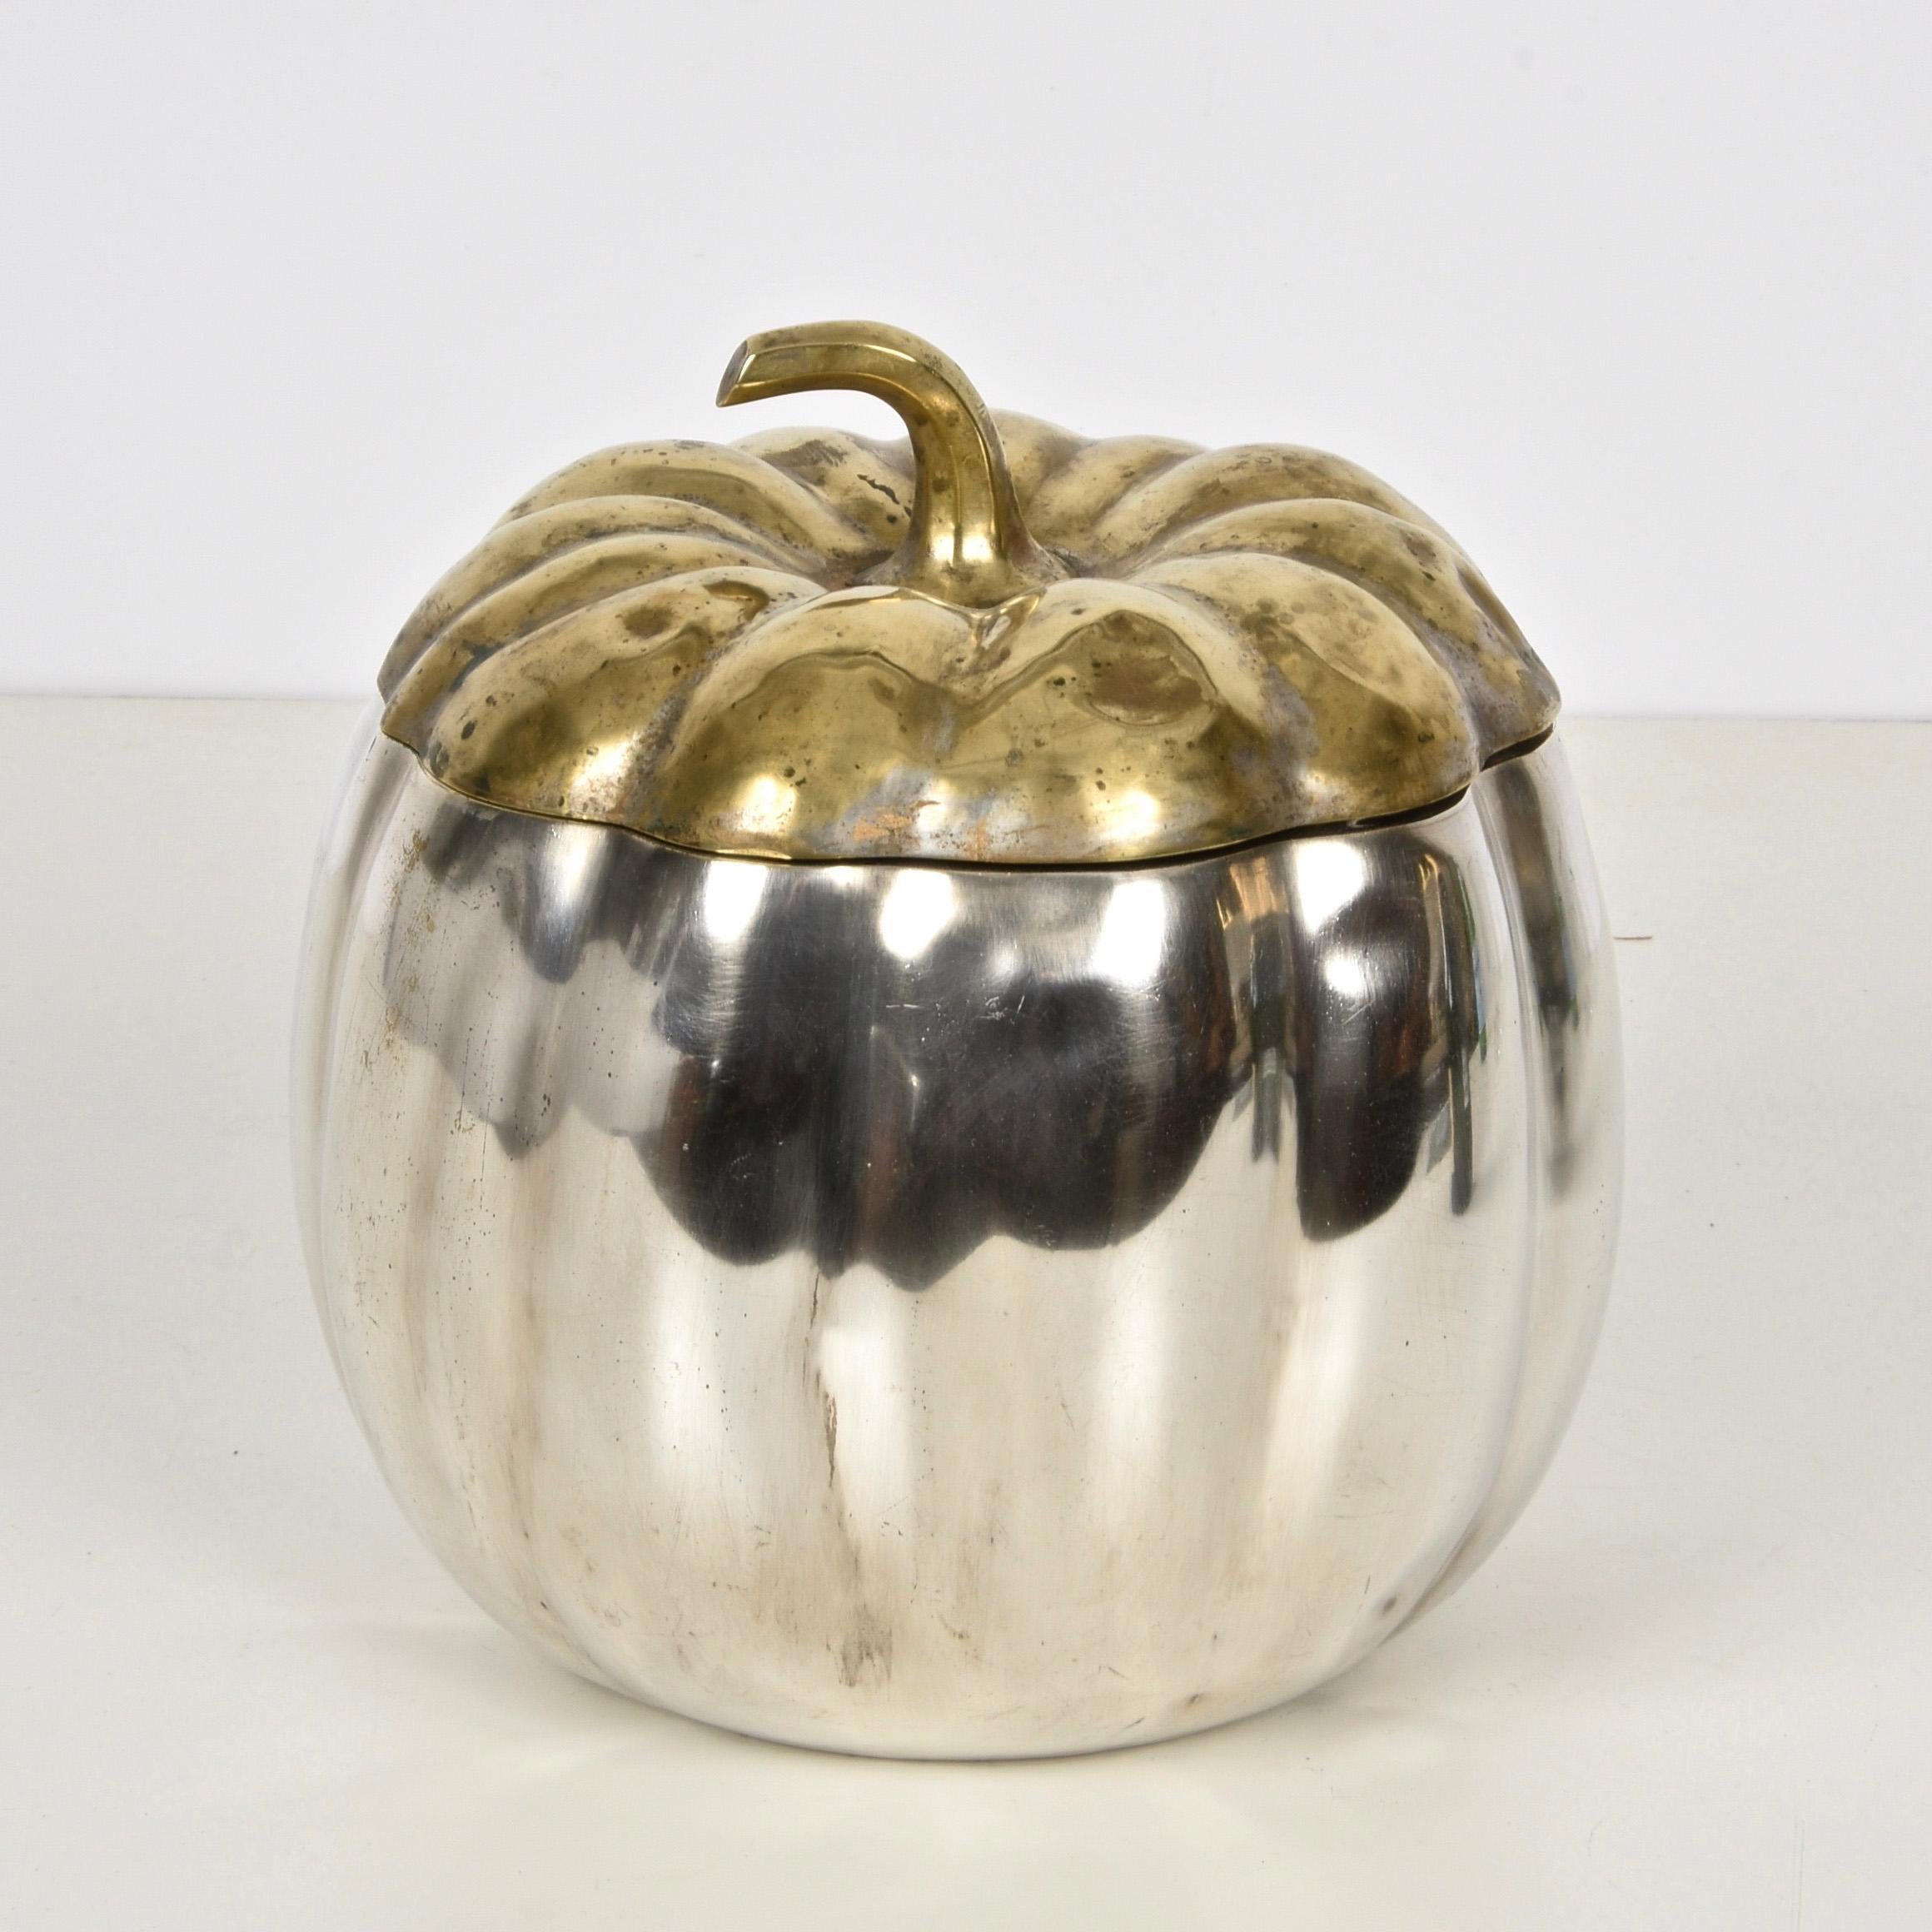 Wonderful midcentury pumpkin-shaped ice bucket in silver plate and brass. This fantastic item was made in Florence, Italy, during the 1960s by Teghini Firenze.

The piece is unique as it is shaped like a pumpkin and has two pieces, the top can be